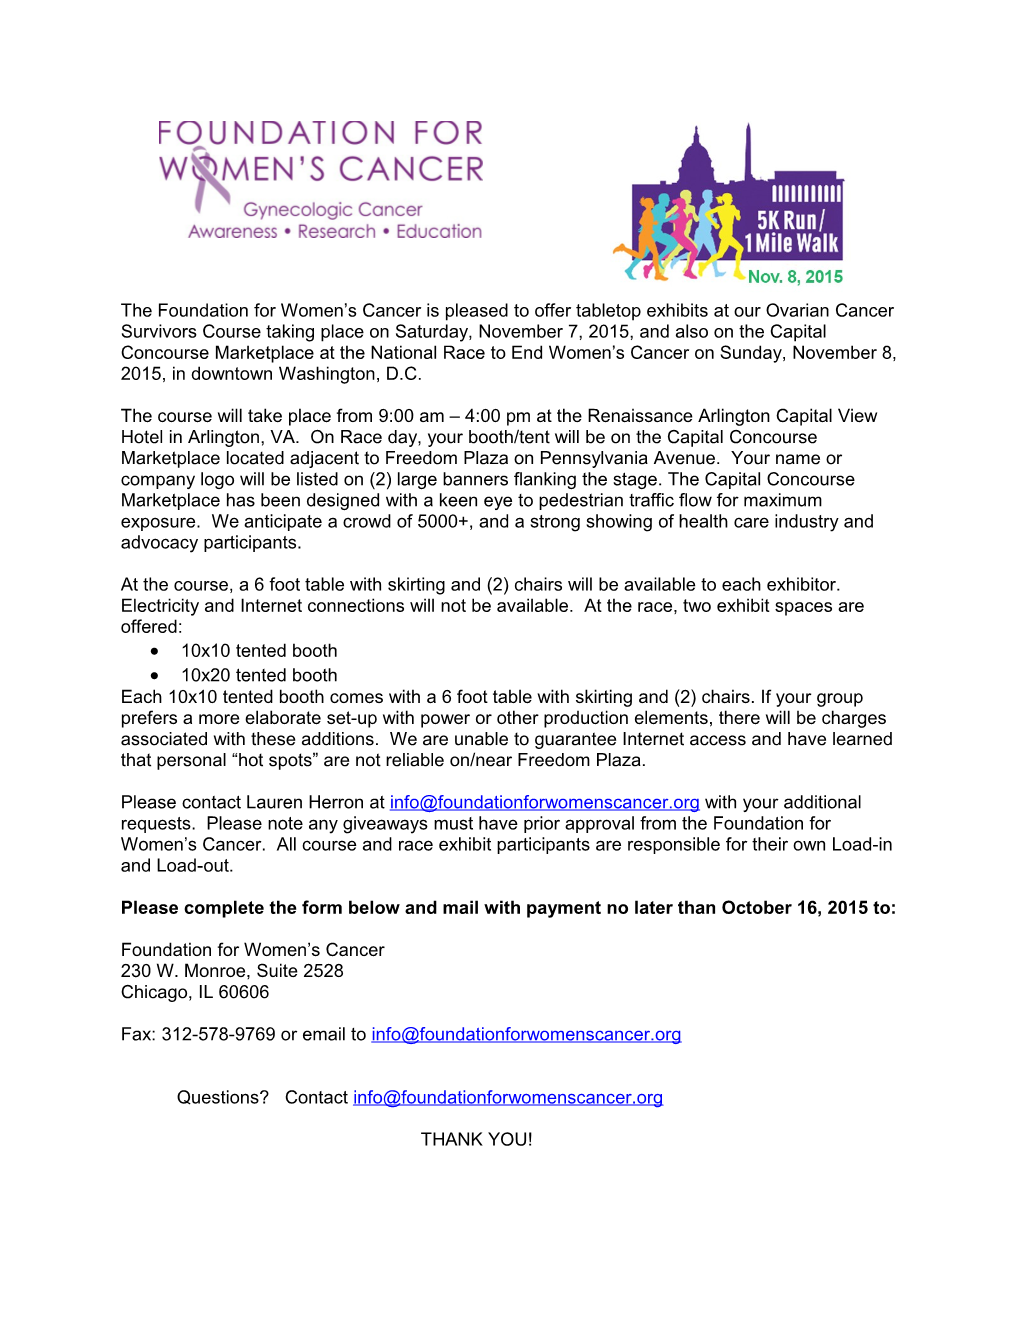 The Foundation for Women S Cancer Is Pleased to Offer Tabletop Exhibits at Our Ovarian